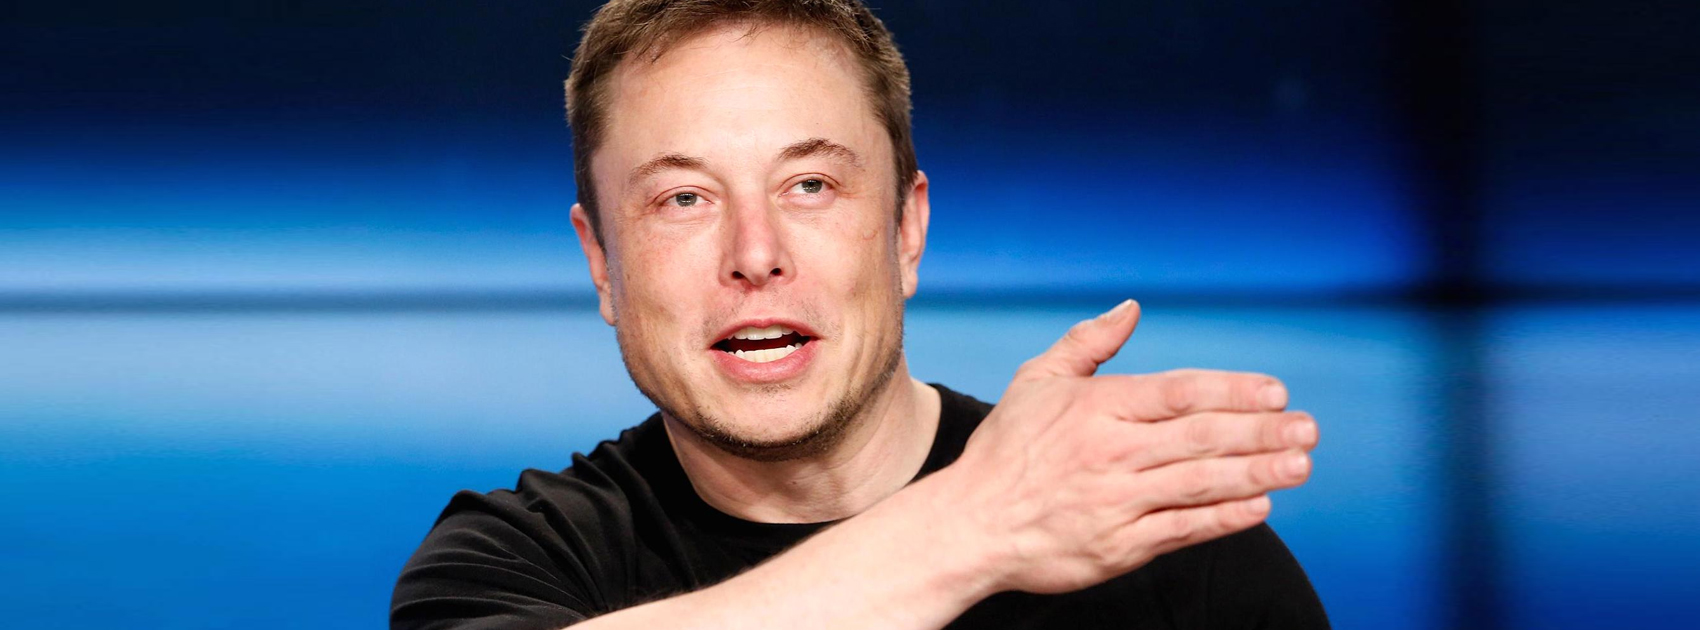 8 Inspirational Elon Musk Quotes,Startup Stories,Startup News India,Inspiring Startup Story,Elon Musk Inspirational Quotes,Elon Musk Motivational Quotes,SpaceX Founder Elon Musk Quotes About Success,Elon Musk Success Story